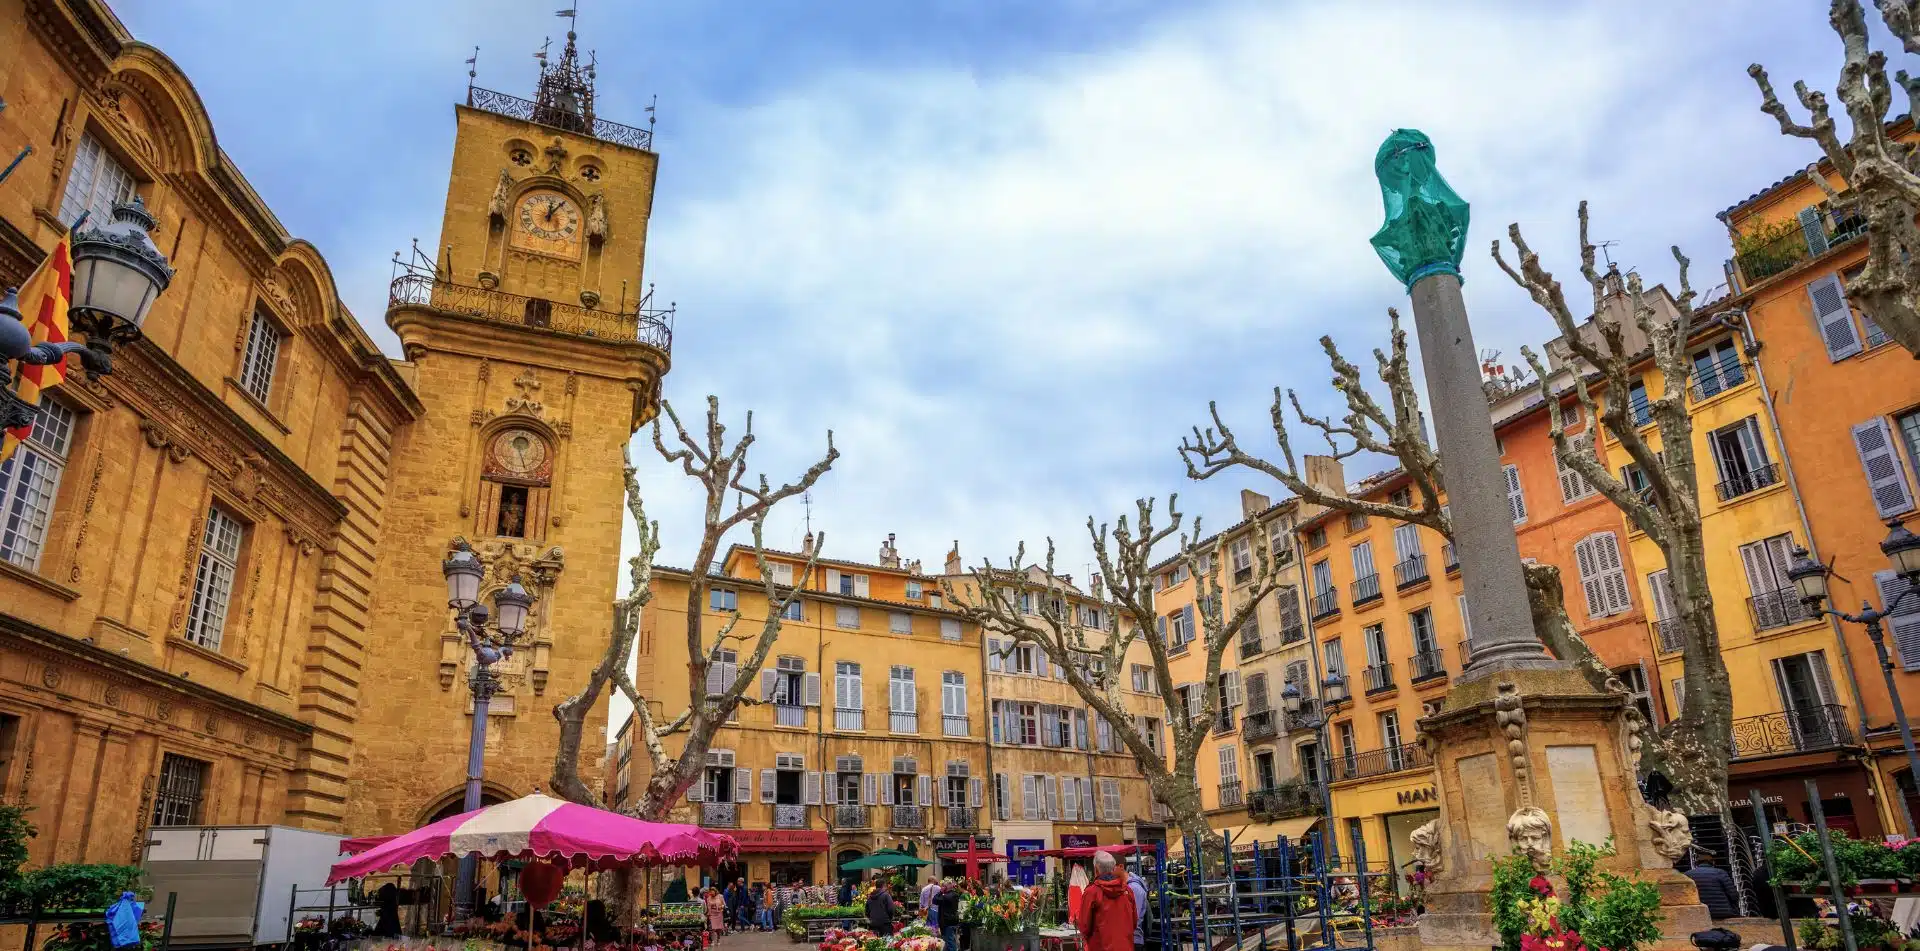 6 - Follow Cézanne's footsteps in the town of Aix-en-Provence